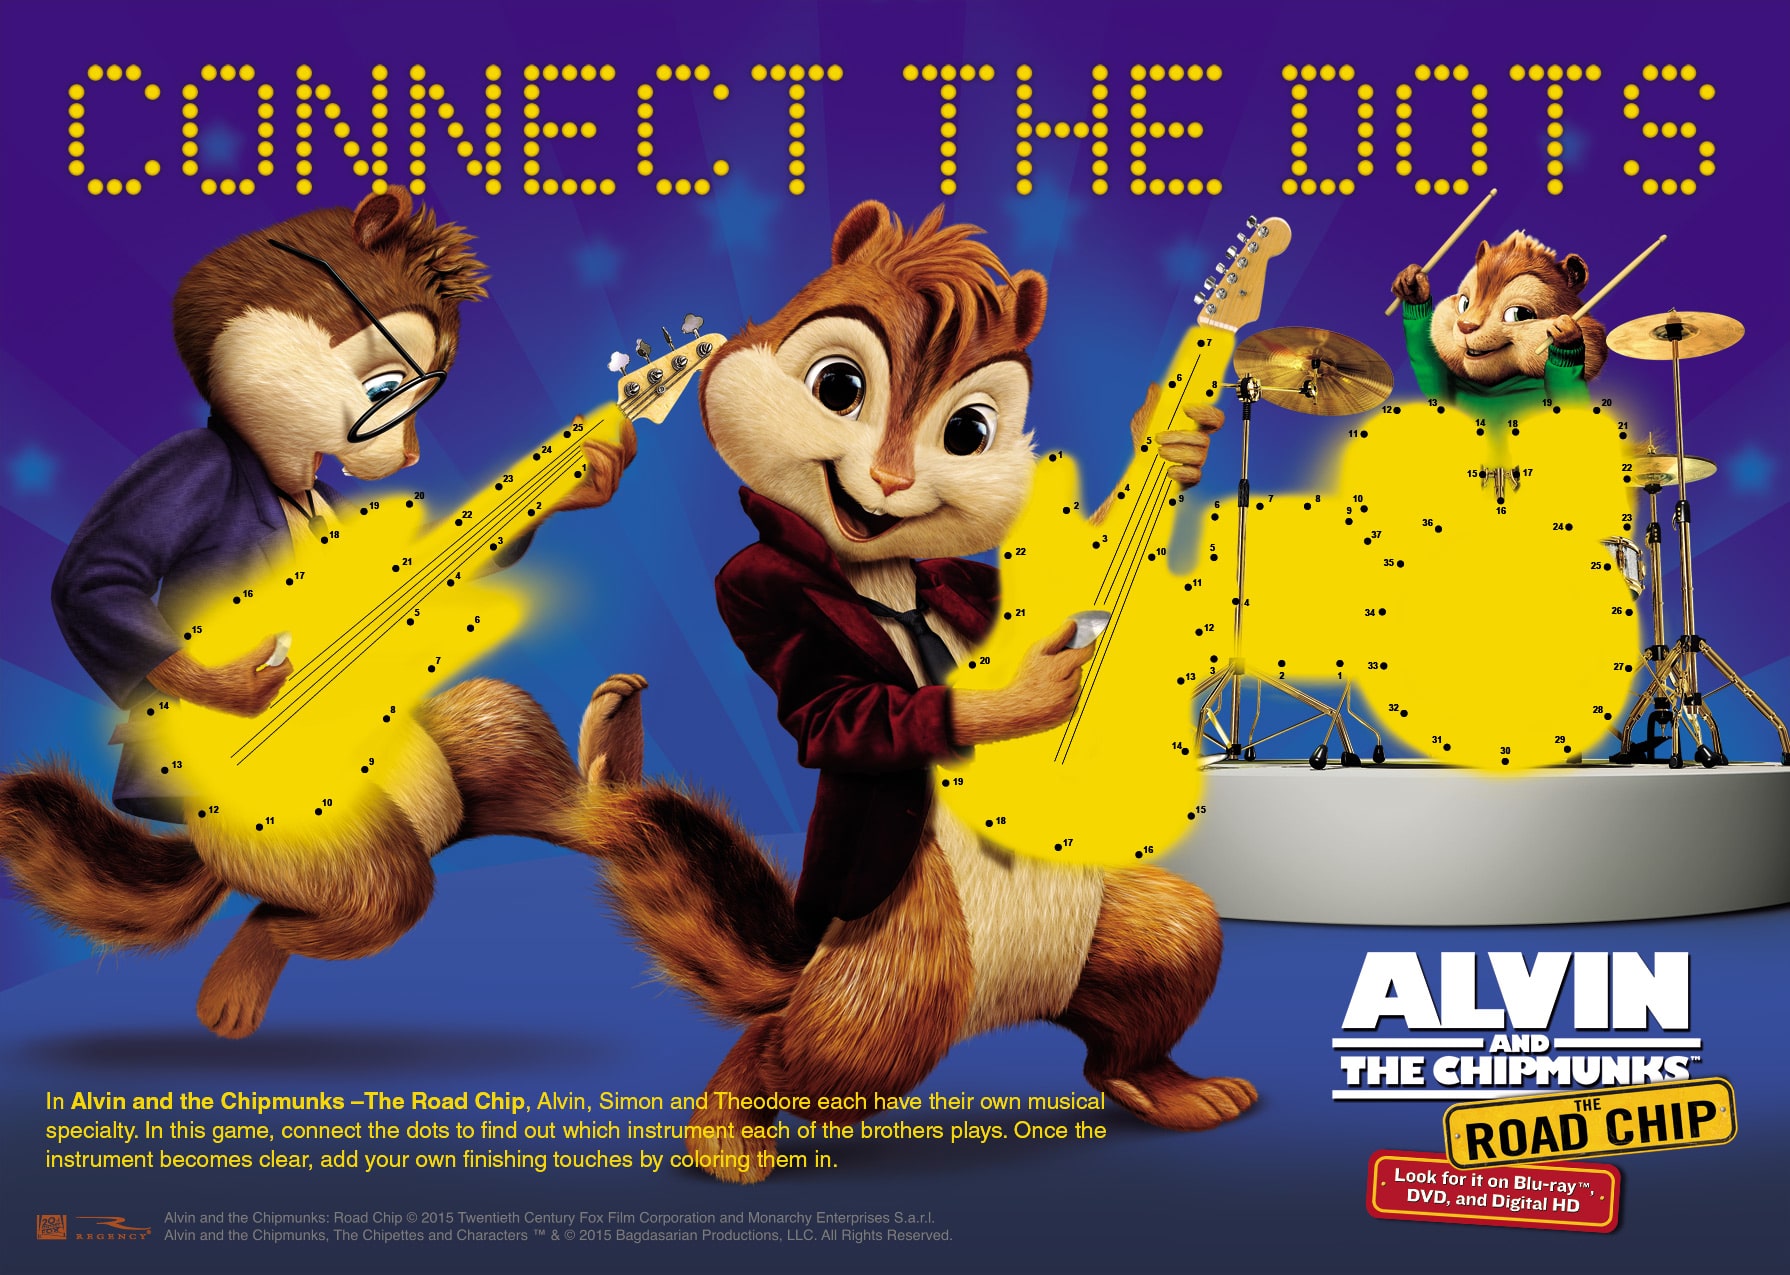 Alvin and the Chipmunks: The Road Chip Activity Sheets.